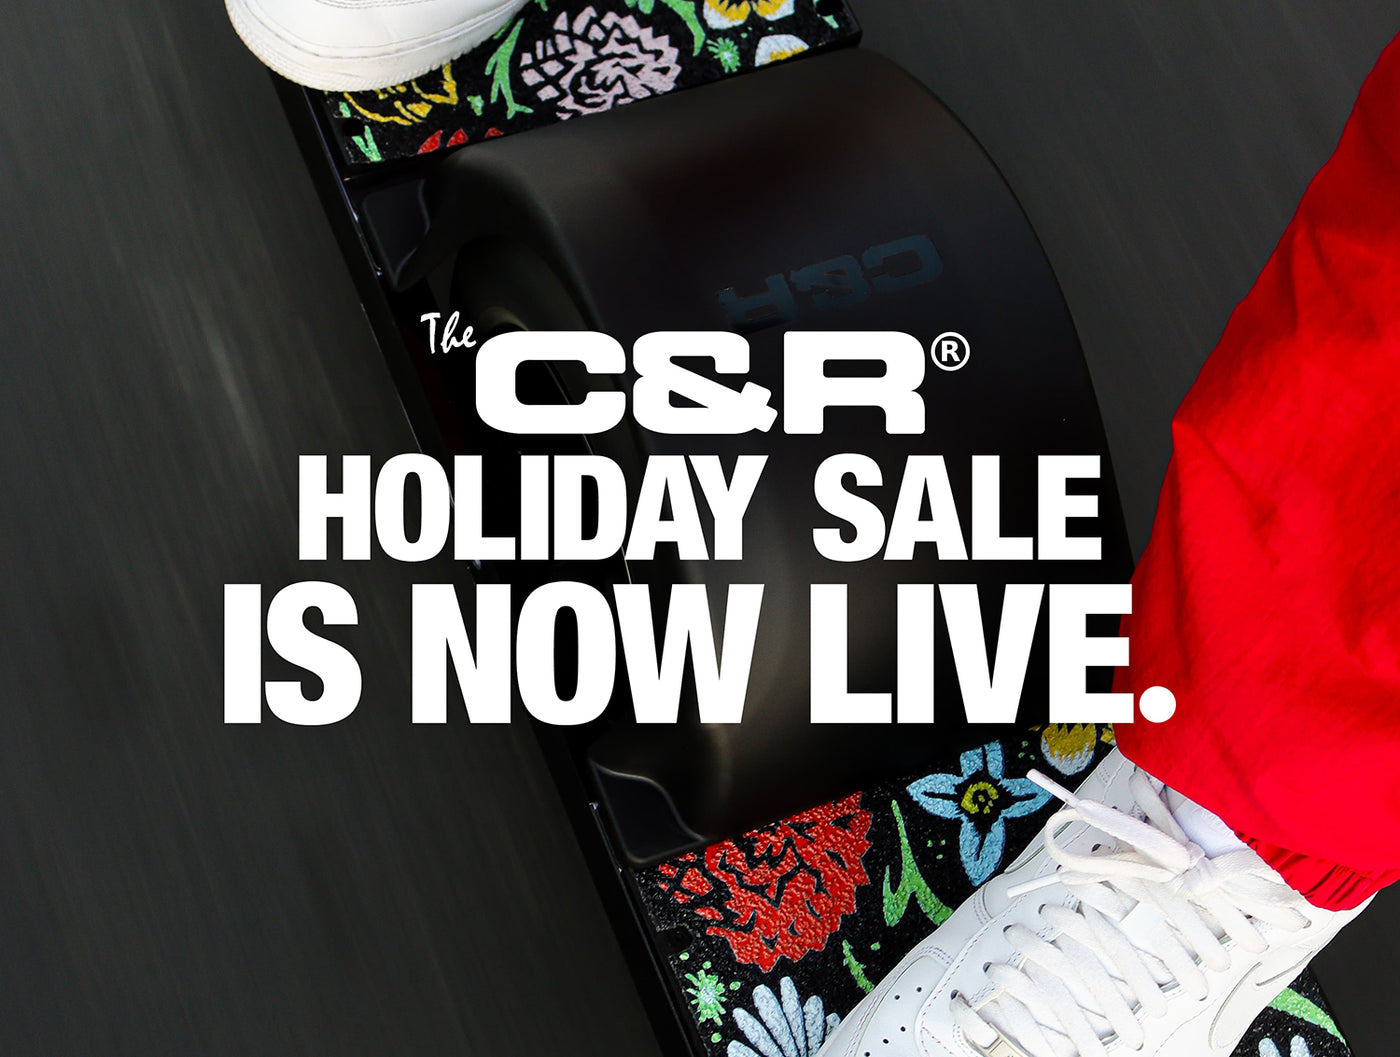 The Craft&Ride Holiday Sale starts now.